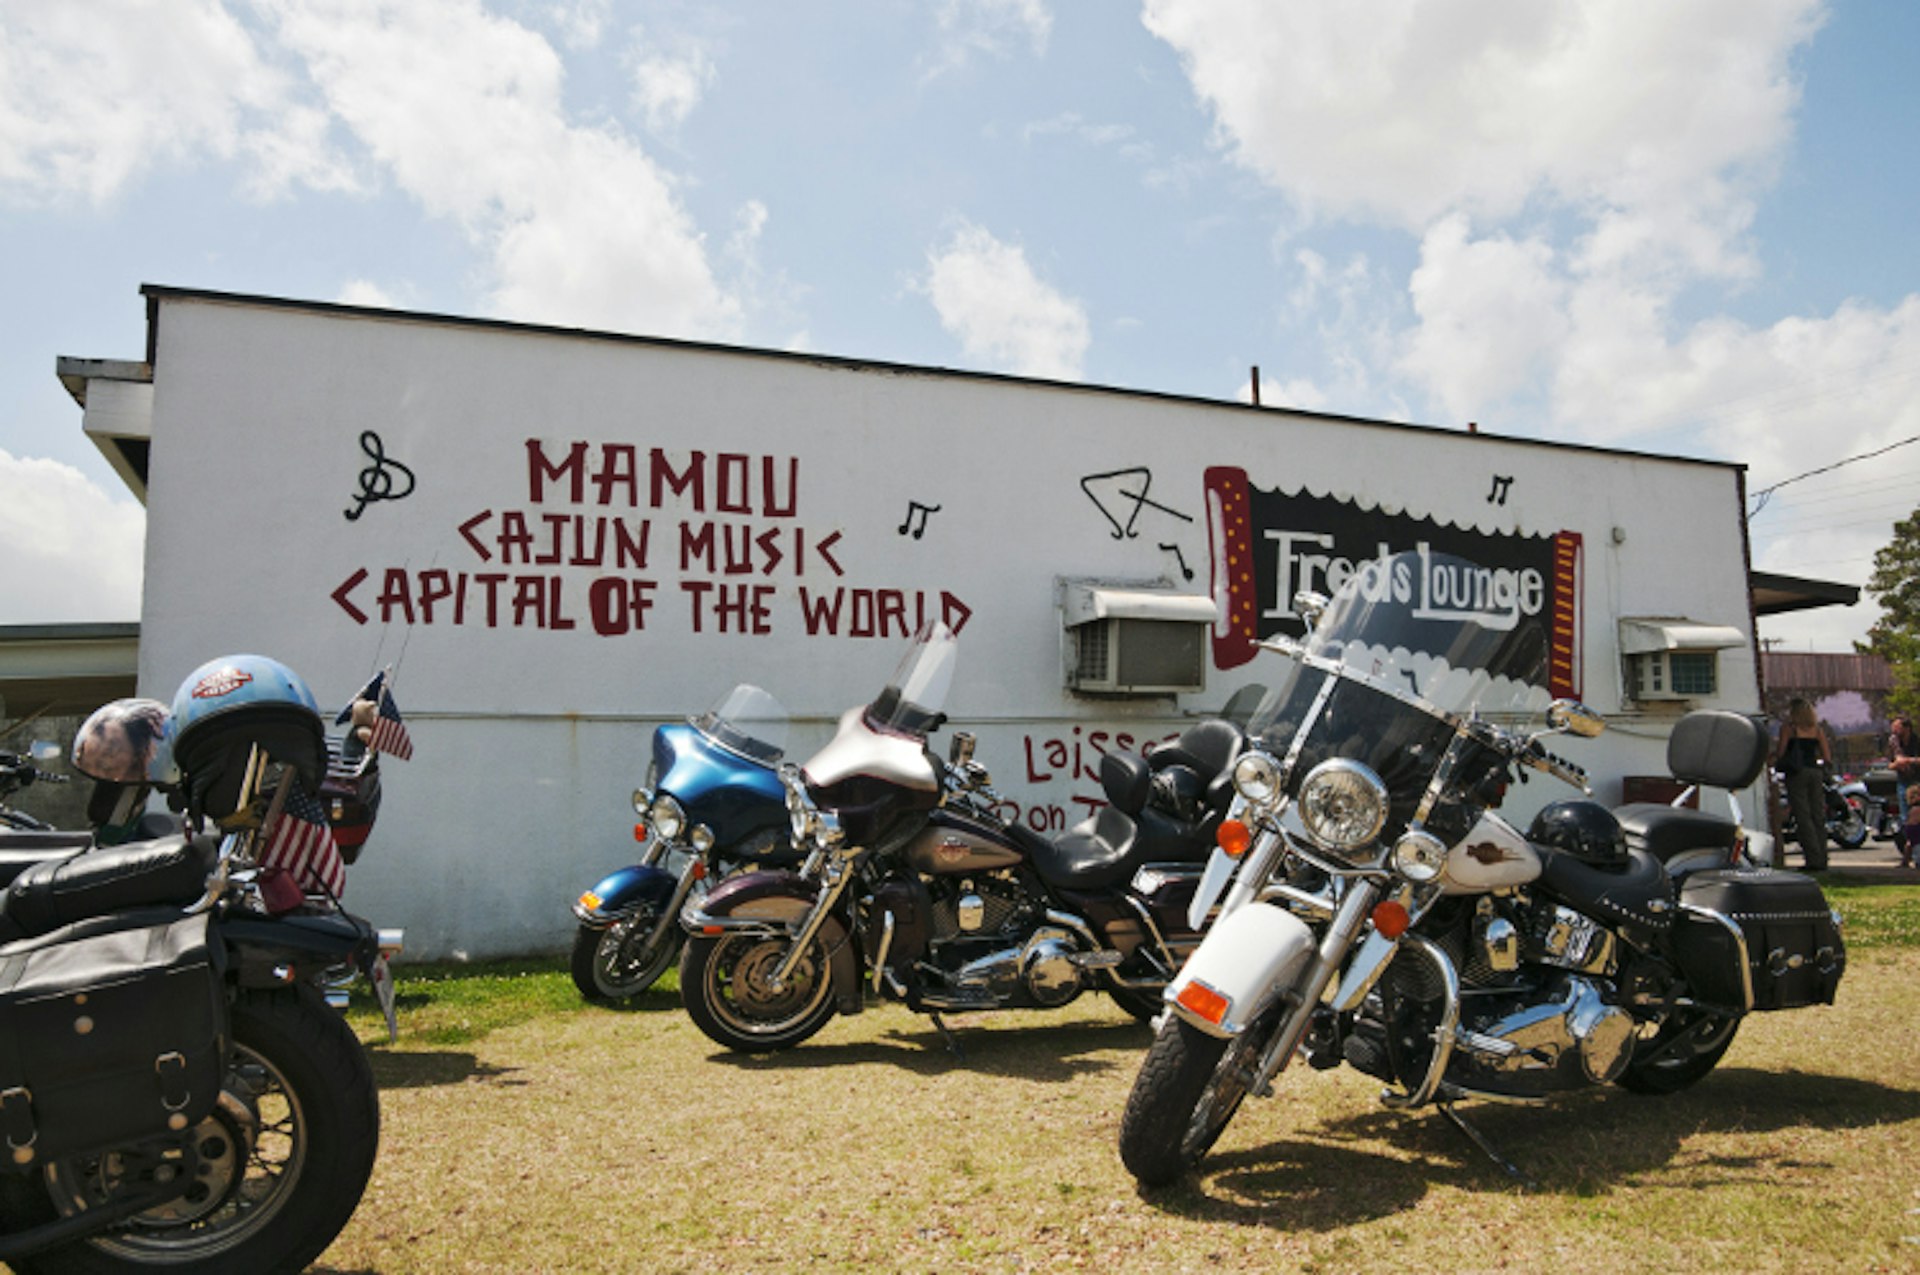 Motorbikes outside Fred's Lounge. Image by Stephen Saks / Lonely Planet Images / Getty Images 